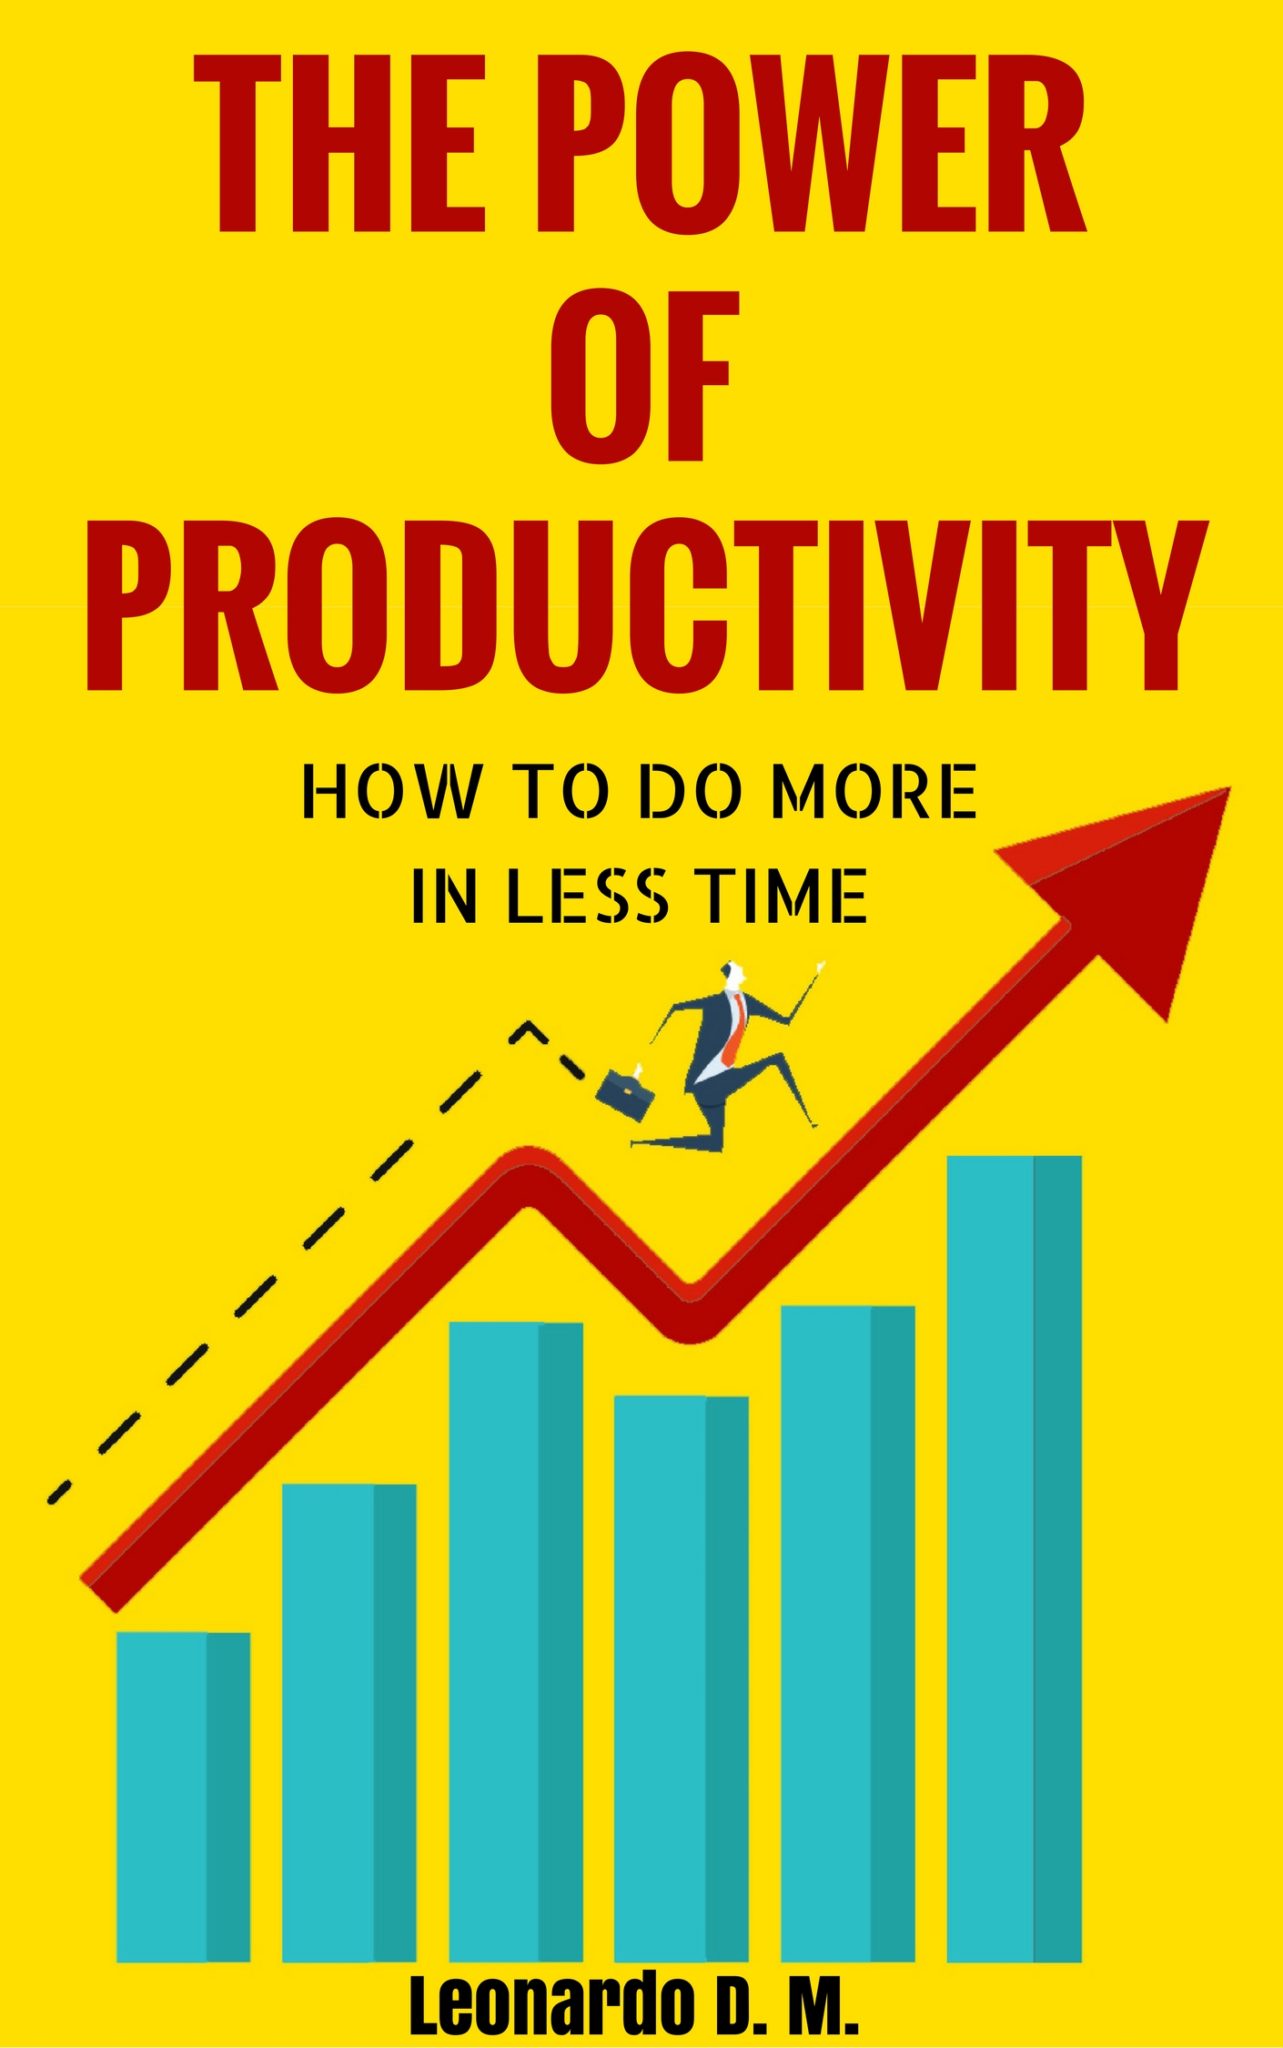 FREE: The Power Of Productivity: How To Do More In Less Time by Leonardo D. M.